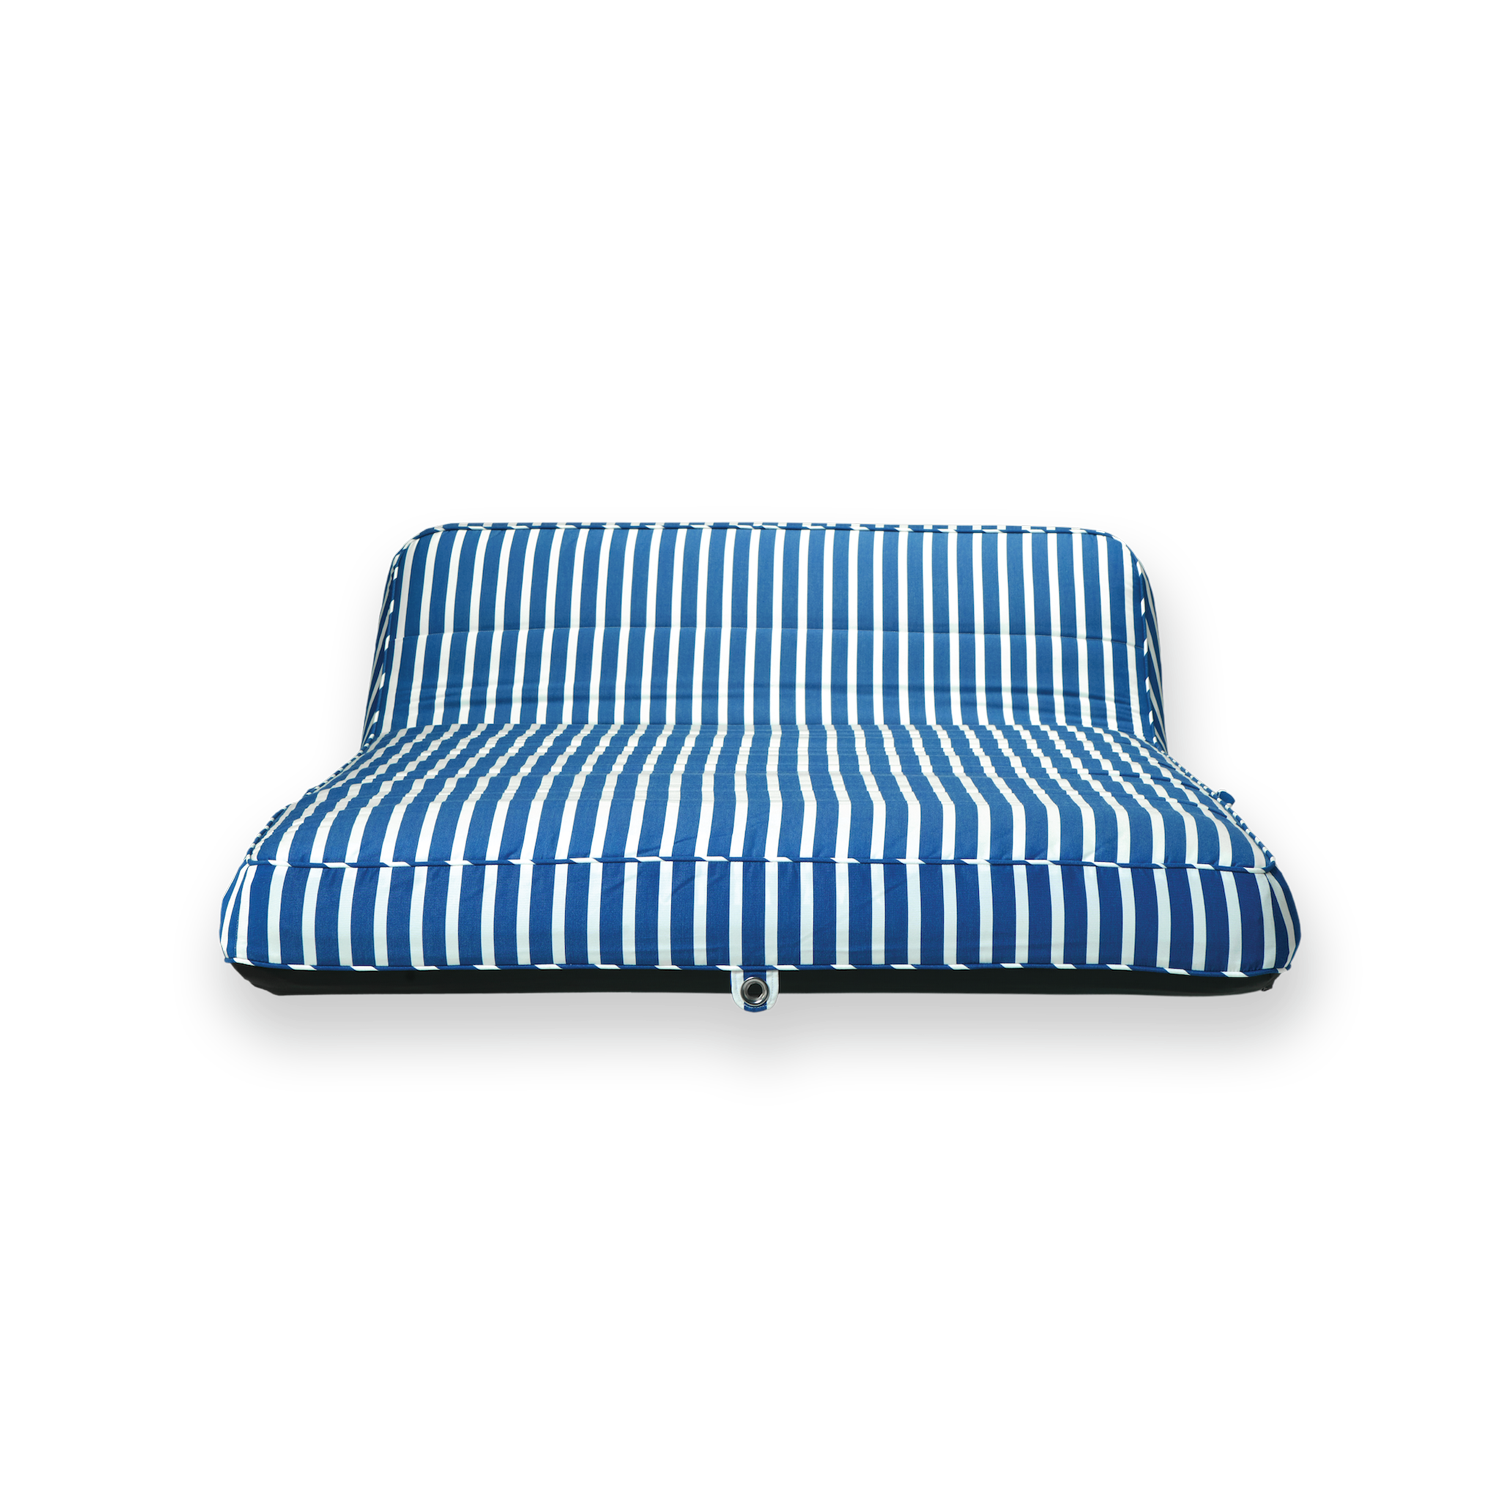 The front profile of a double blue and white striped luxury pool float.